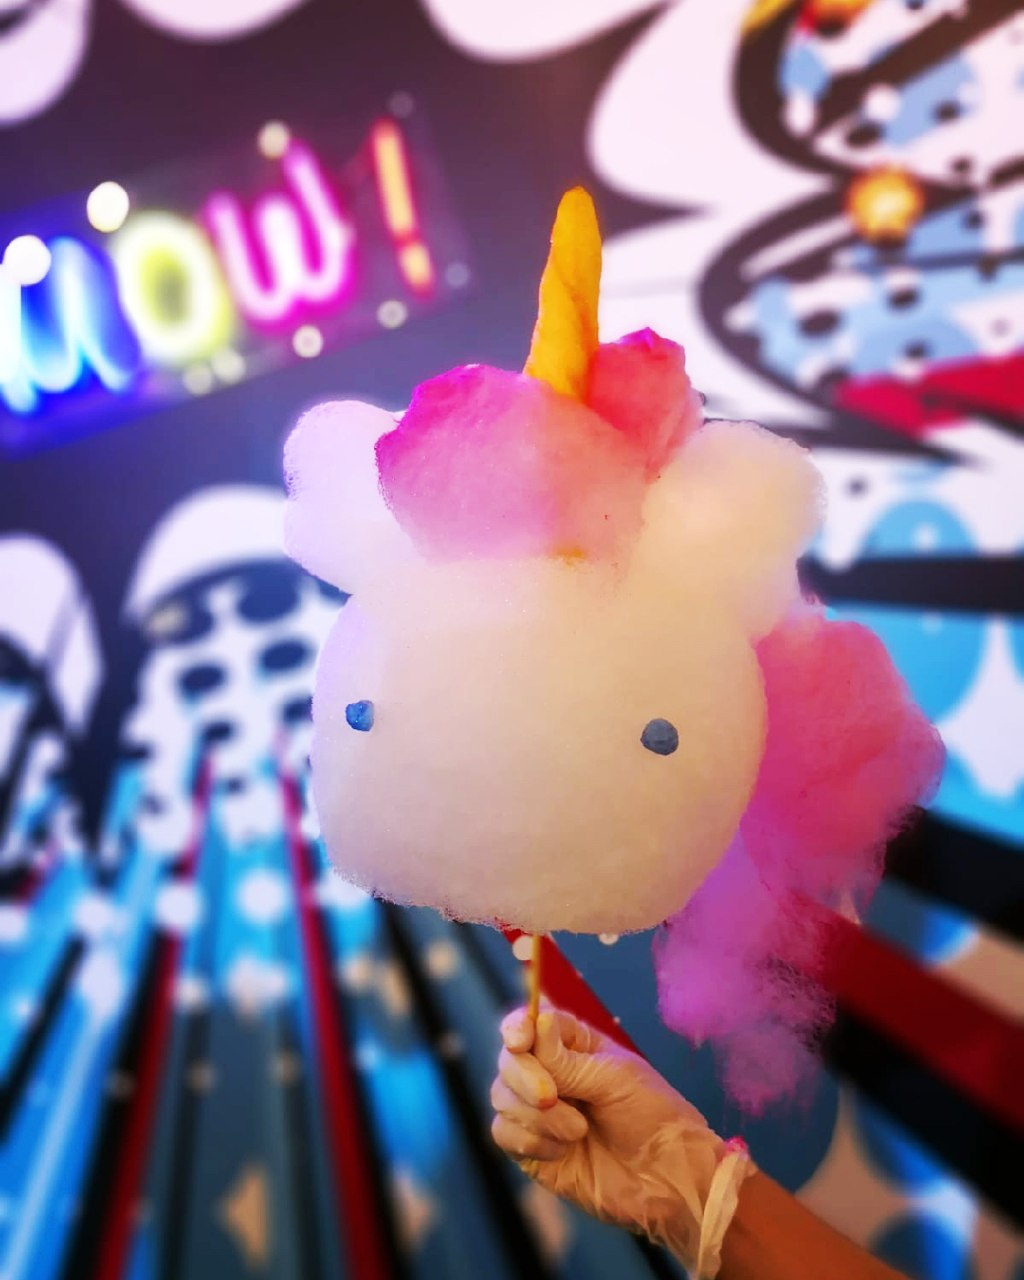 Market On Wheels At Bugis - Cereal Citizen Unicorn cotton candy